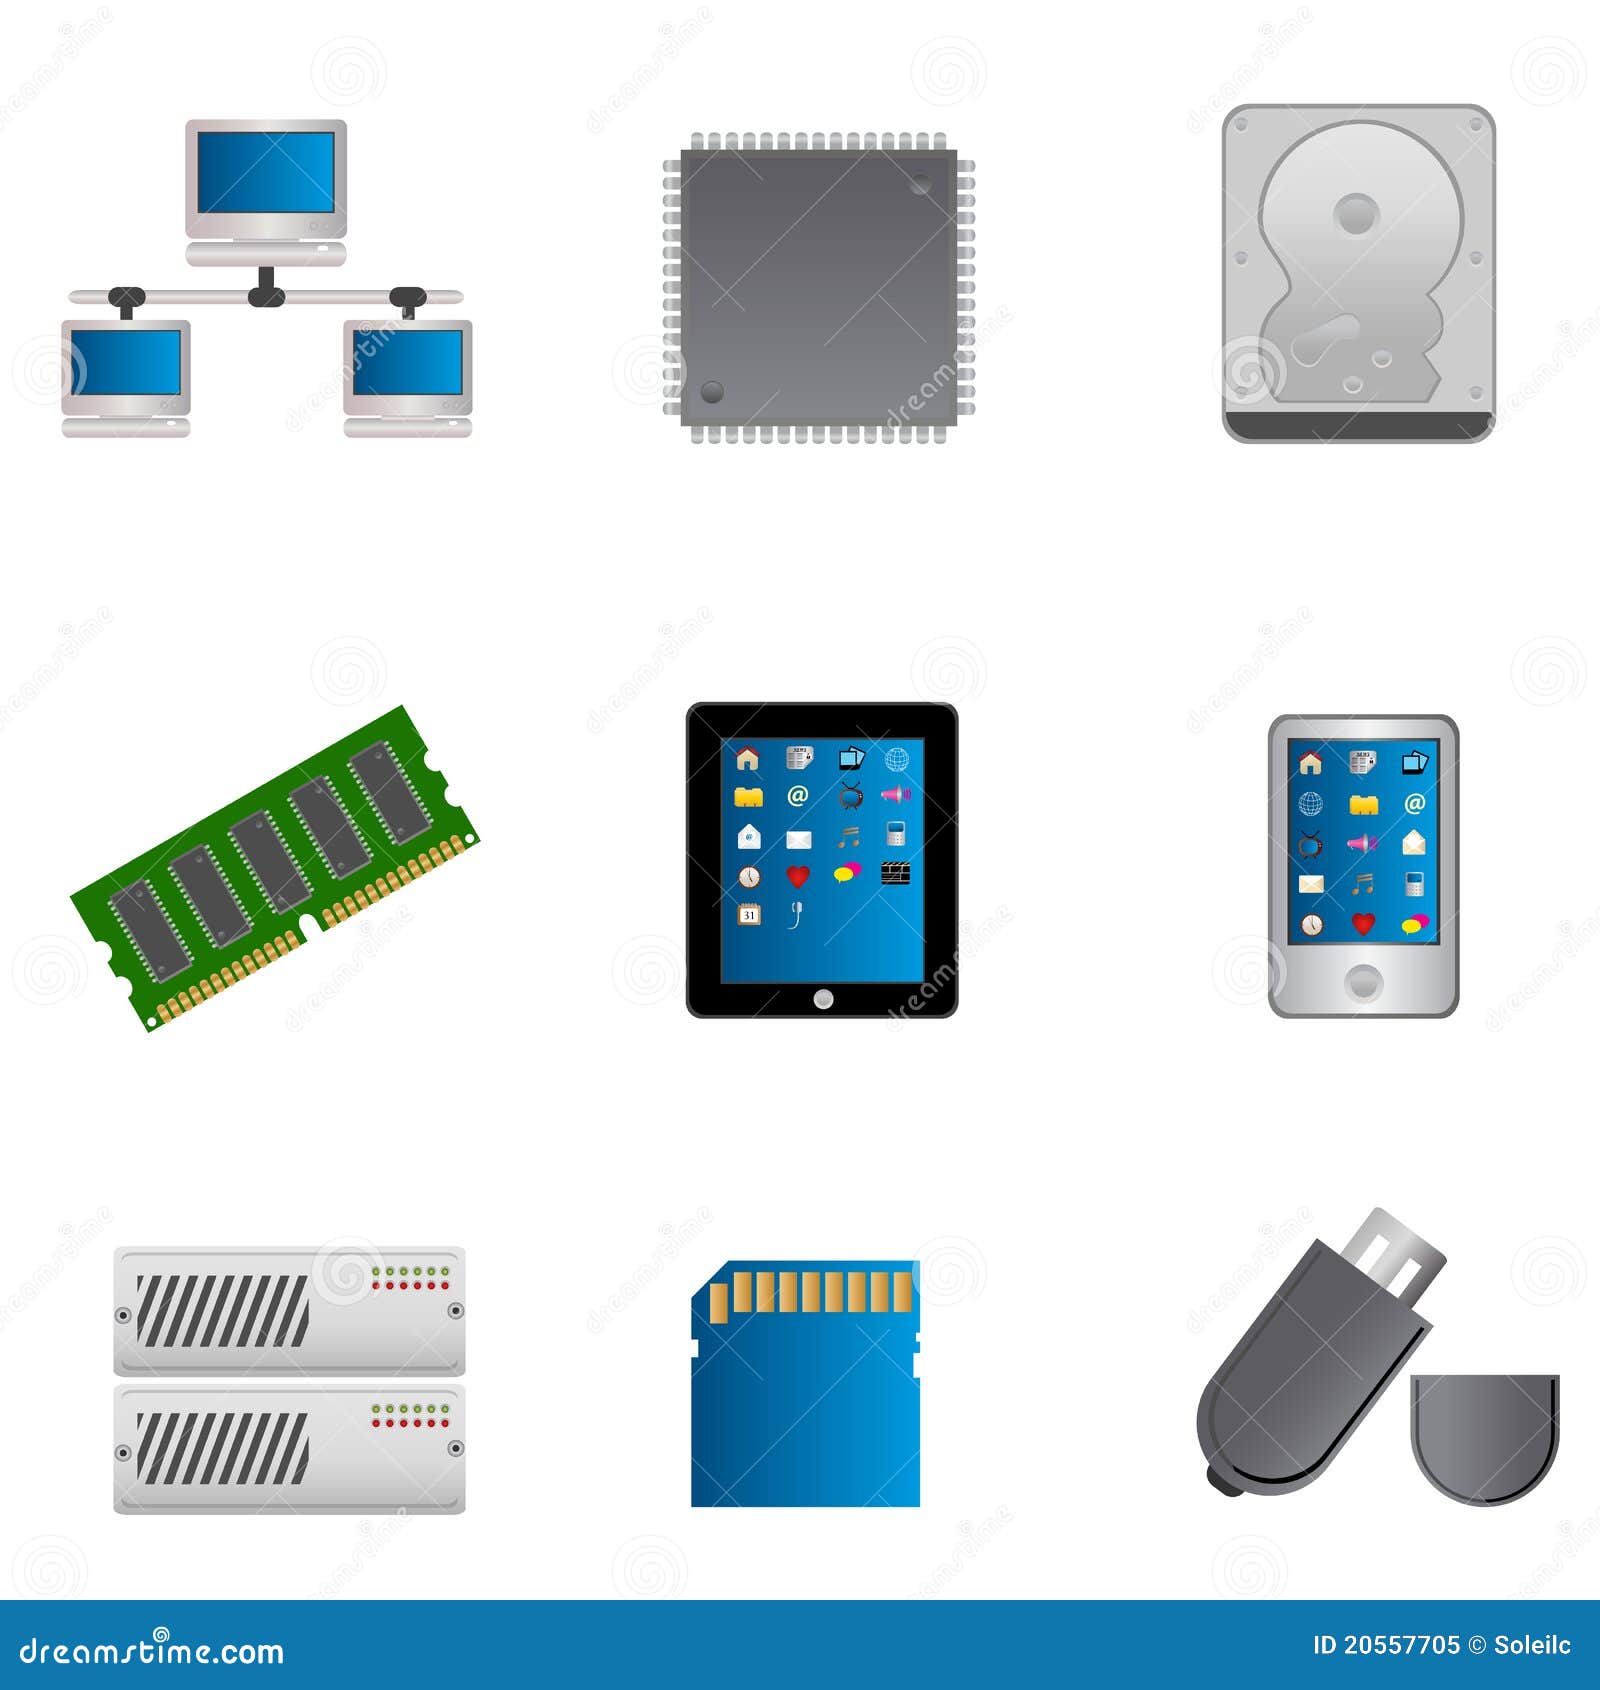 accessories,accessory,art,cable,card,case,central,collection,computer ,design,drawing,drive,equipment,flash,headphones,headset,icon,illustration,internet,isolated,joystick,logo,monitor,monochrome,outline,mouse,network,personal,power,printer,processing  ...